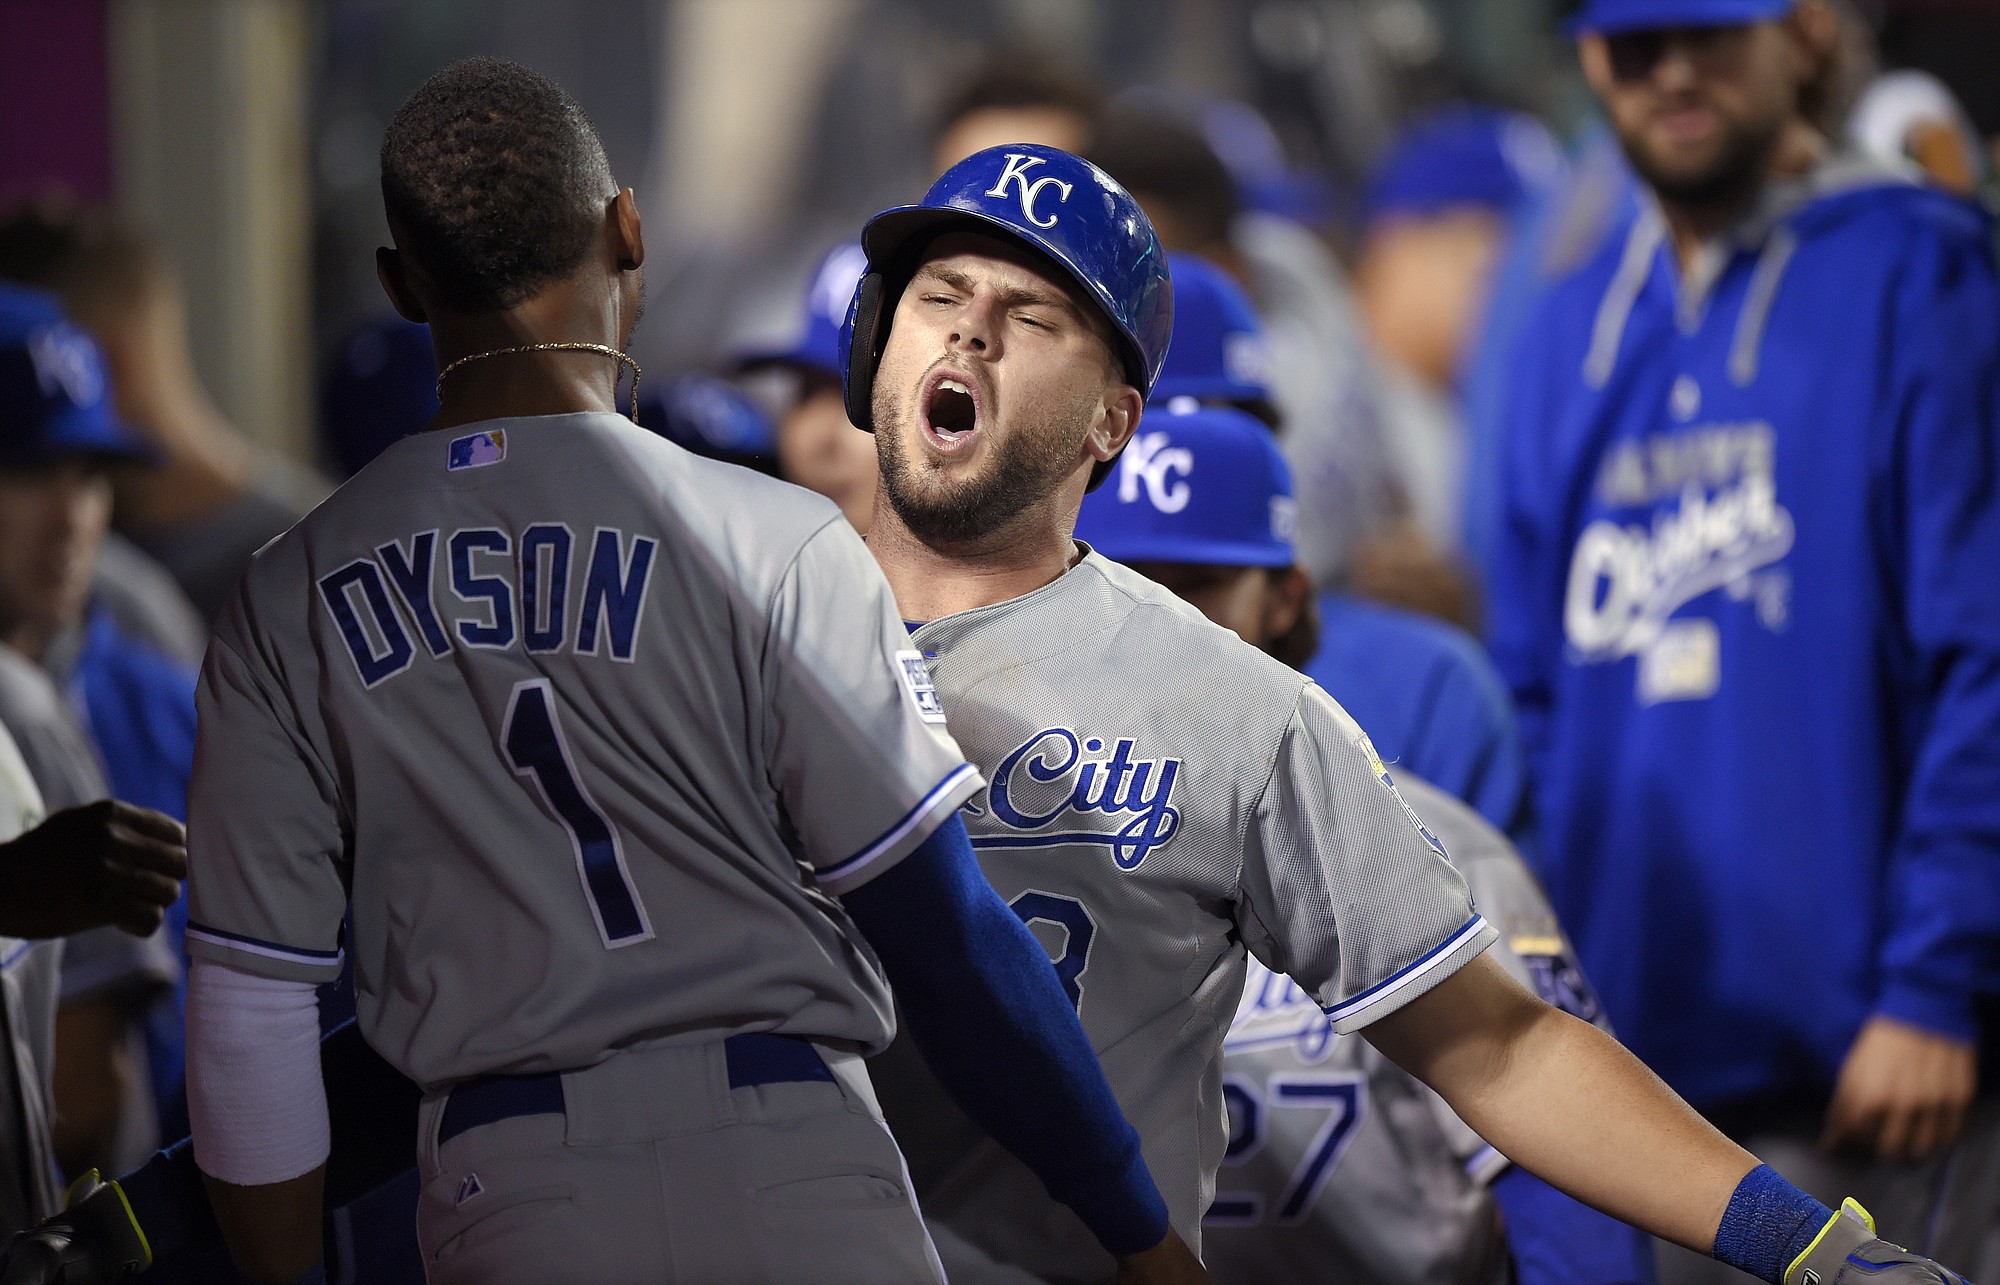 Kansas City Royals' Mike Moustakas celebrates his home run with Jarrod Dyson, during the 11th inning against the Los Angeles Angels in Game 1 of the AL Division Series in Anaheim, Calif., Thursday, Oct. 2, 2014. (AP Photo/Mark J.